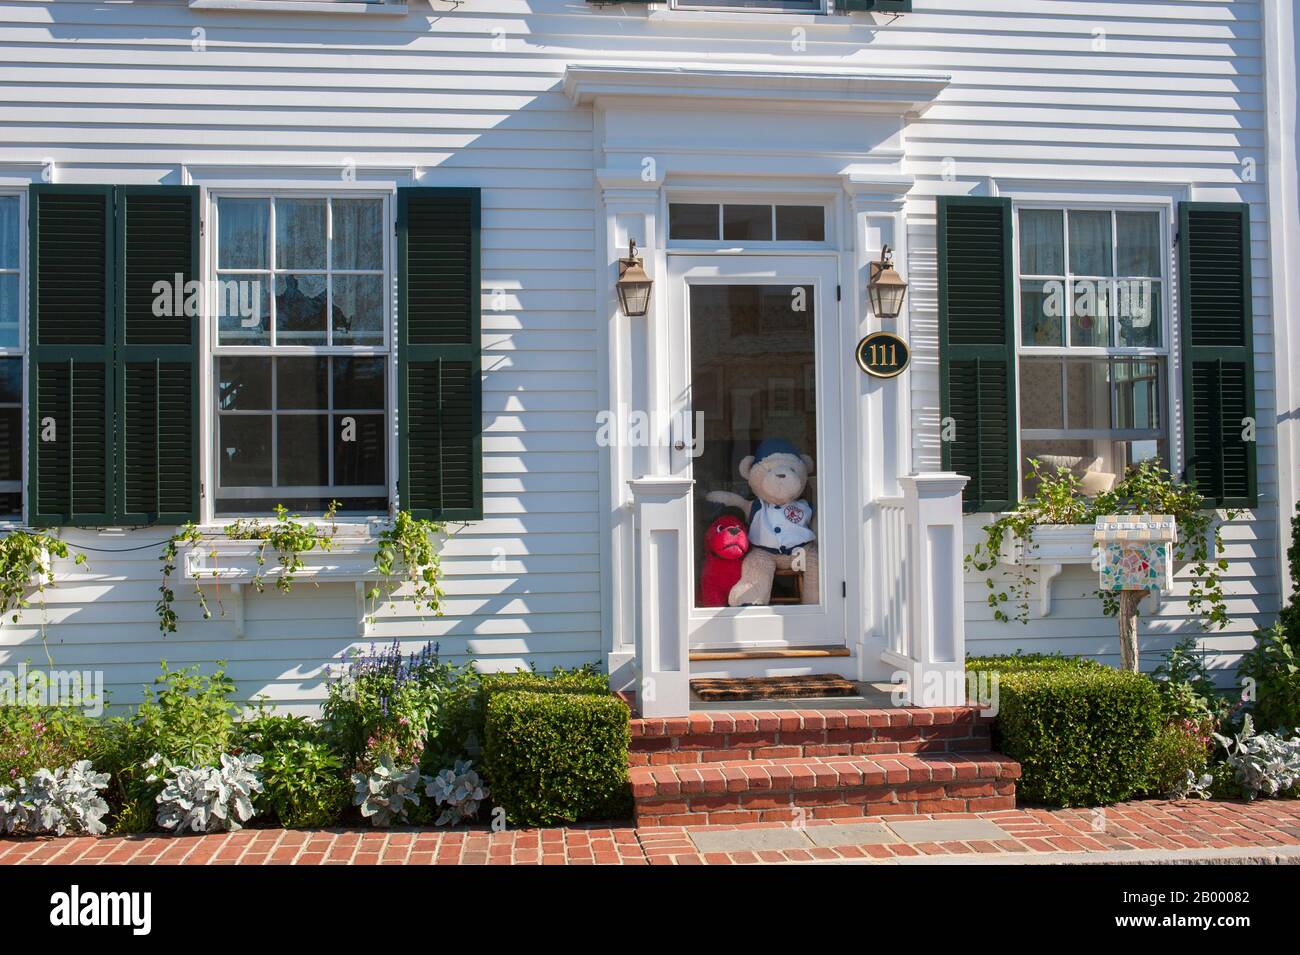 Detail of the front of a house in Edgartown on Martha’s Vineyard, Massachusetts, USA. Stock Photo